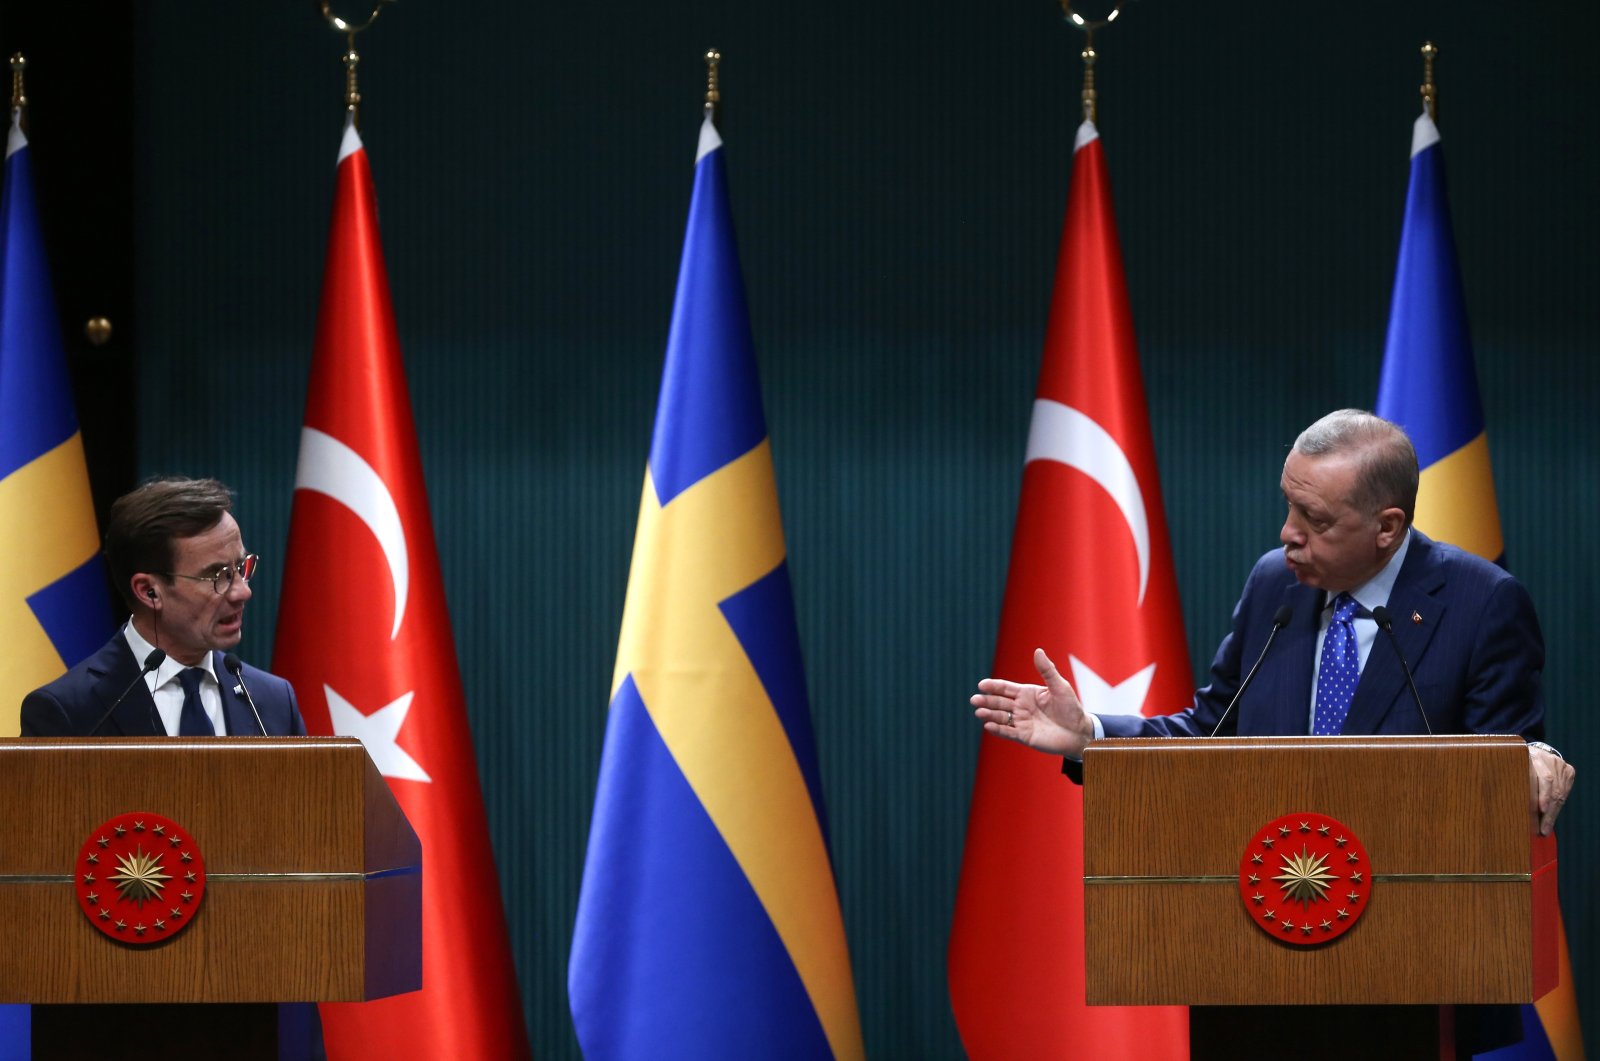 President Recep Tayyip Erdoğan (R) and Swedish Prime Minister Ulf Kristersson attend a press conference after their meeting at the Presidential Palace in the capital Ankara, Türkiye, Nov. 8, 2022. (EPA Photo)